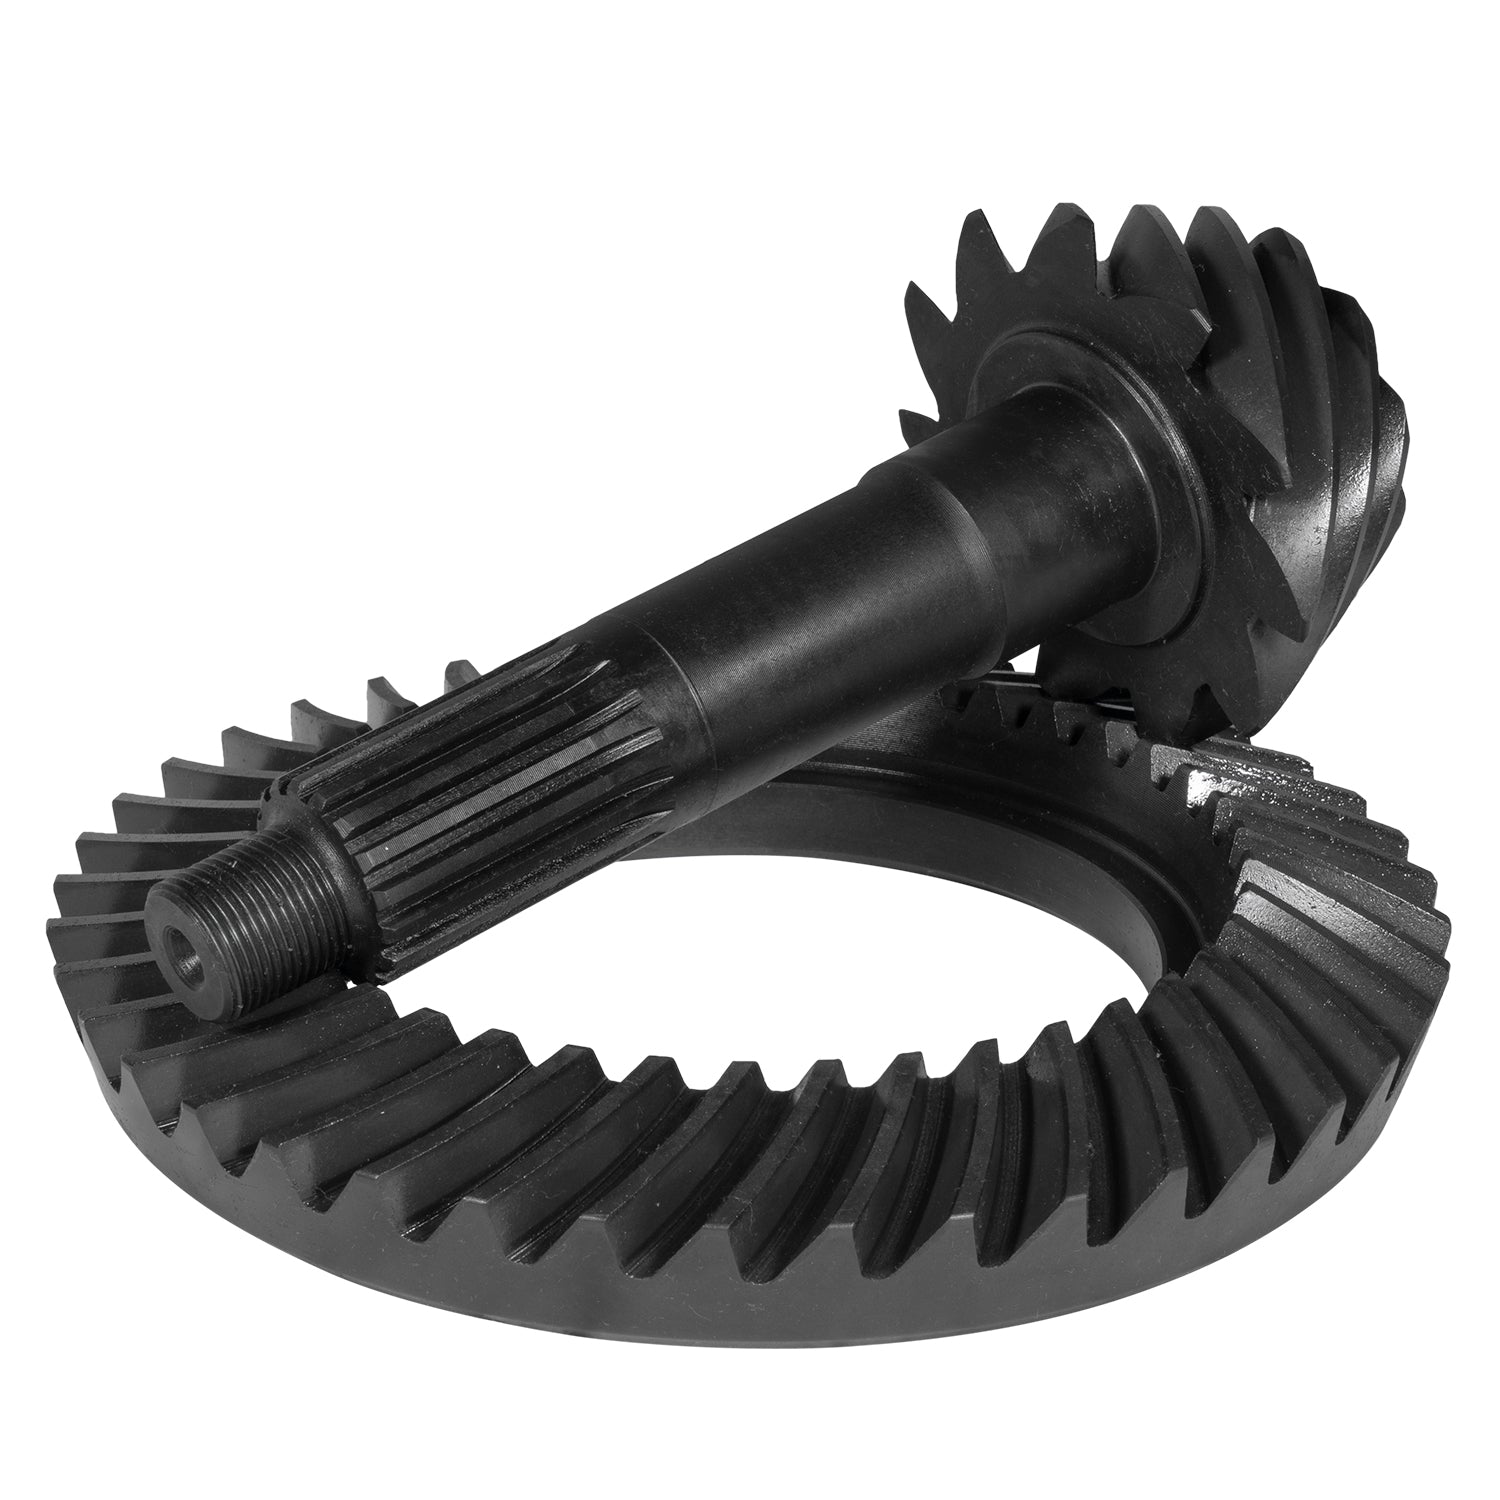 Yukon Gear Chevrolet Differential Ring and Pinion Kit - Rear YGK2366